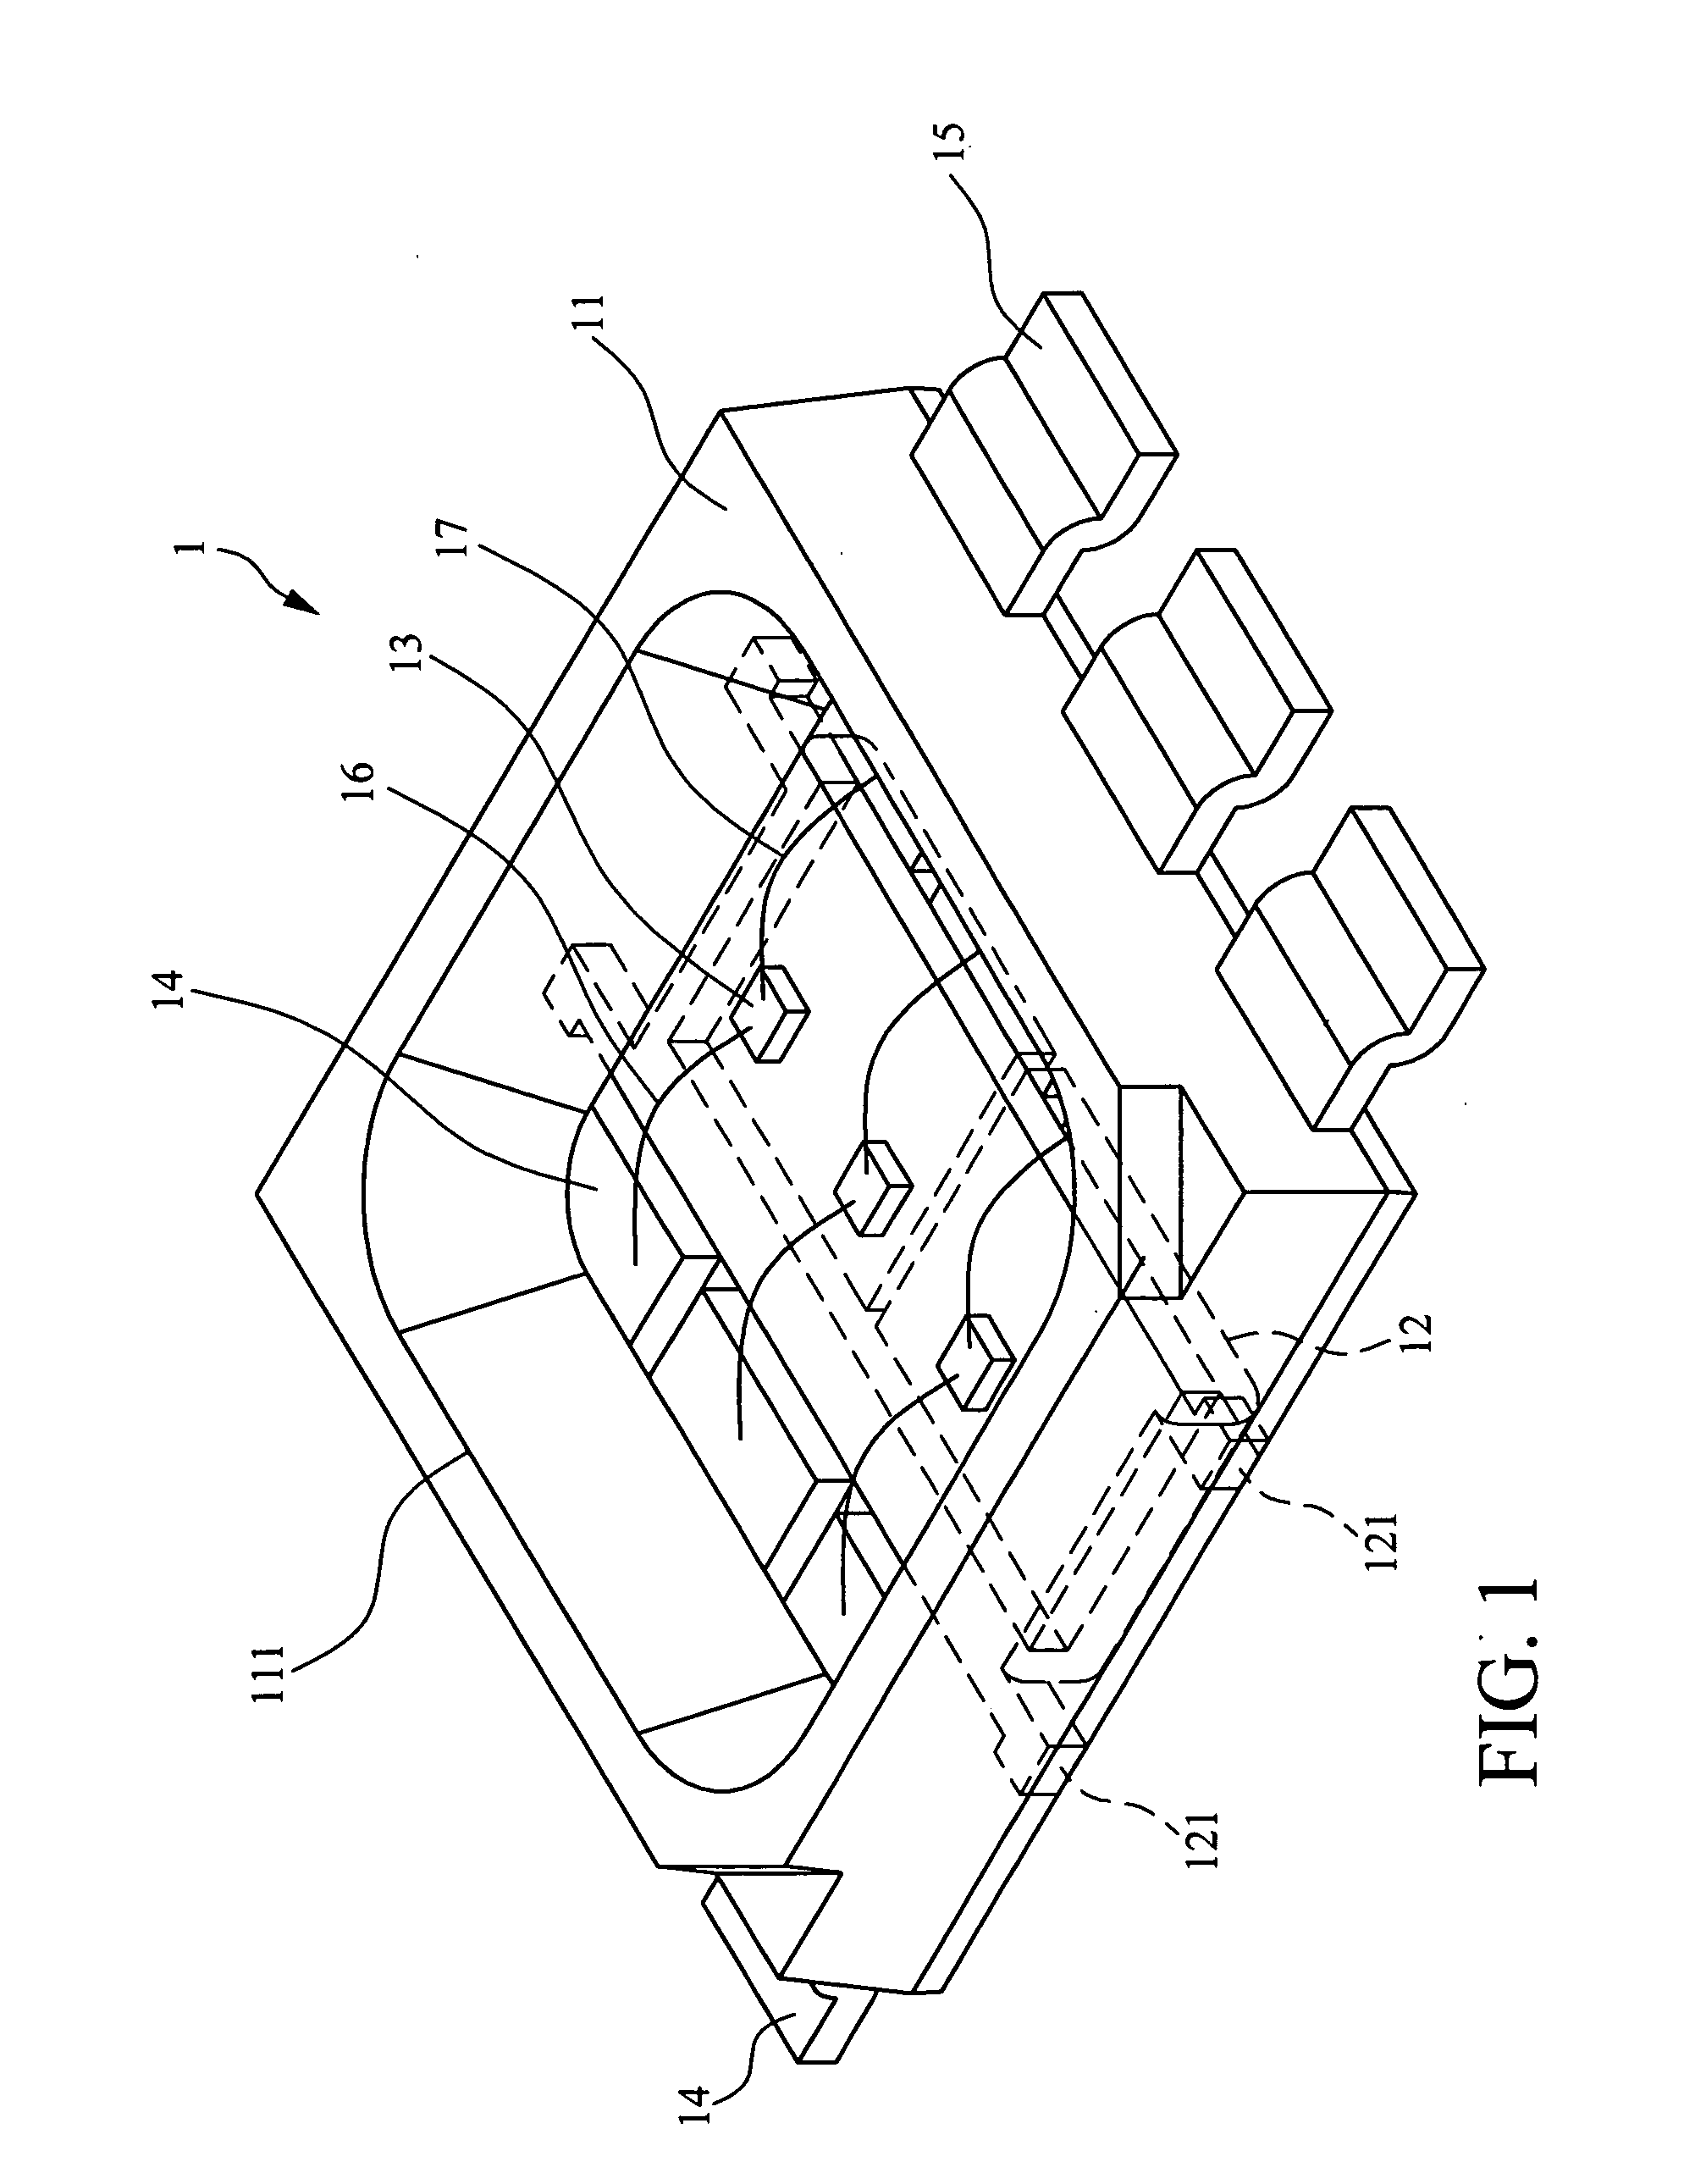 Heat dissipation structure of light-emitting diode